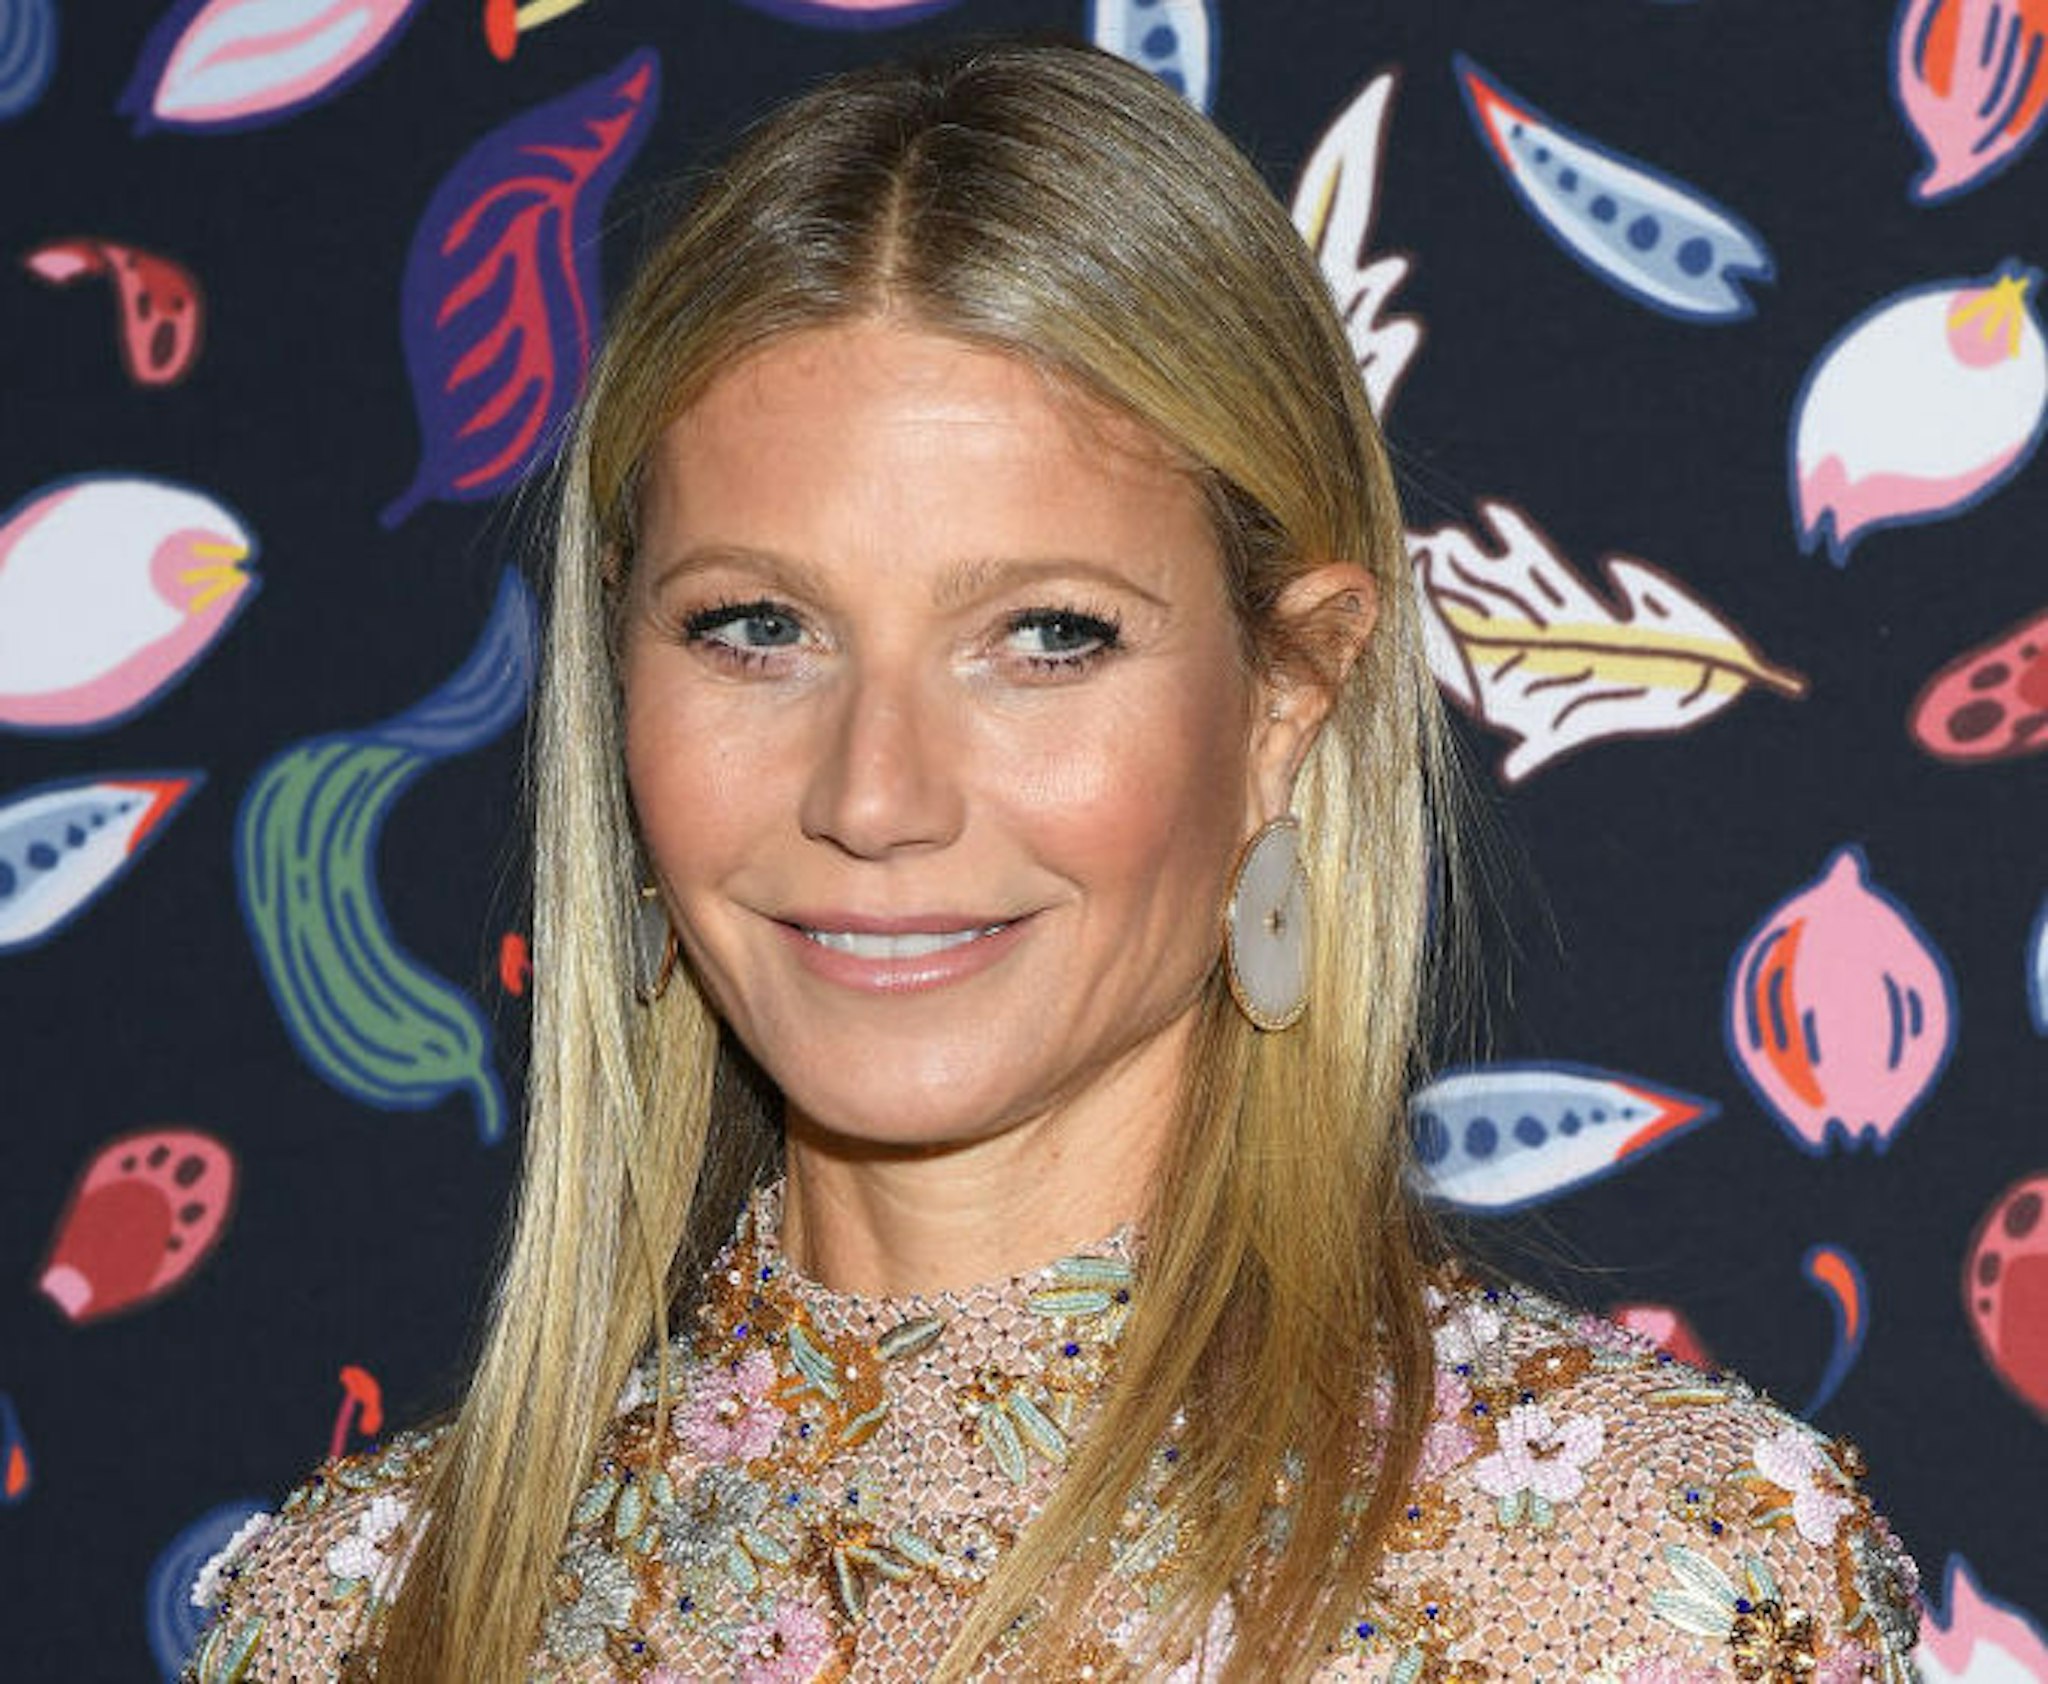 Gwyneth Paltrow attends the Harper's Bazaar Exhibition as part of the Paris Fashion Week Womenswear Fall/Winter 2020/2021 At Musee Des Arts Decoratifs on February 26, 2020 in Paris, France.